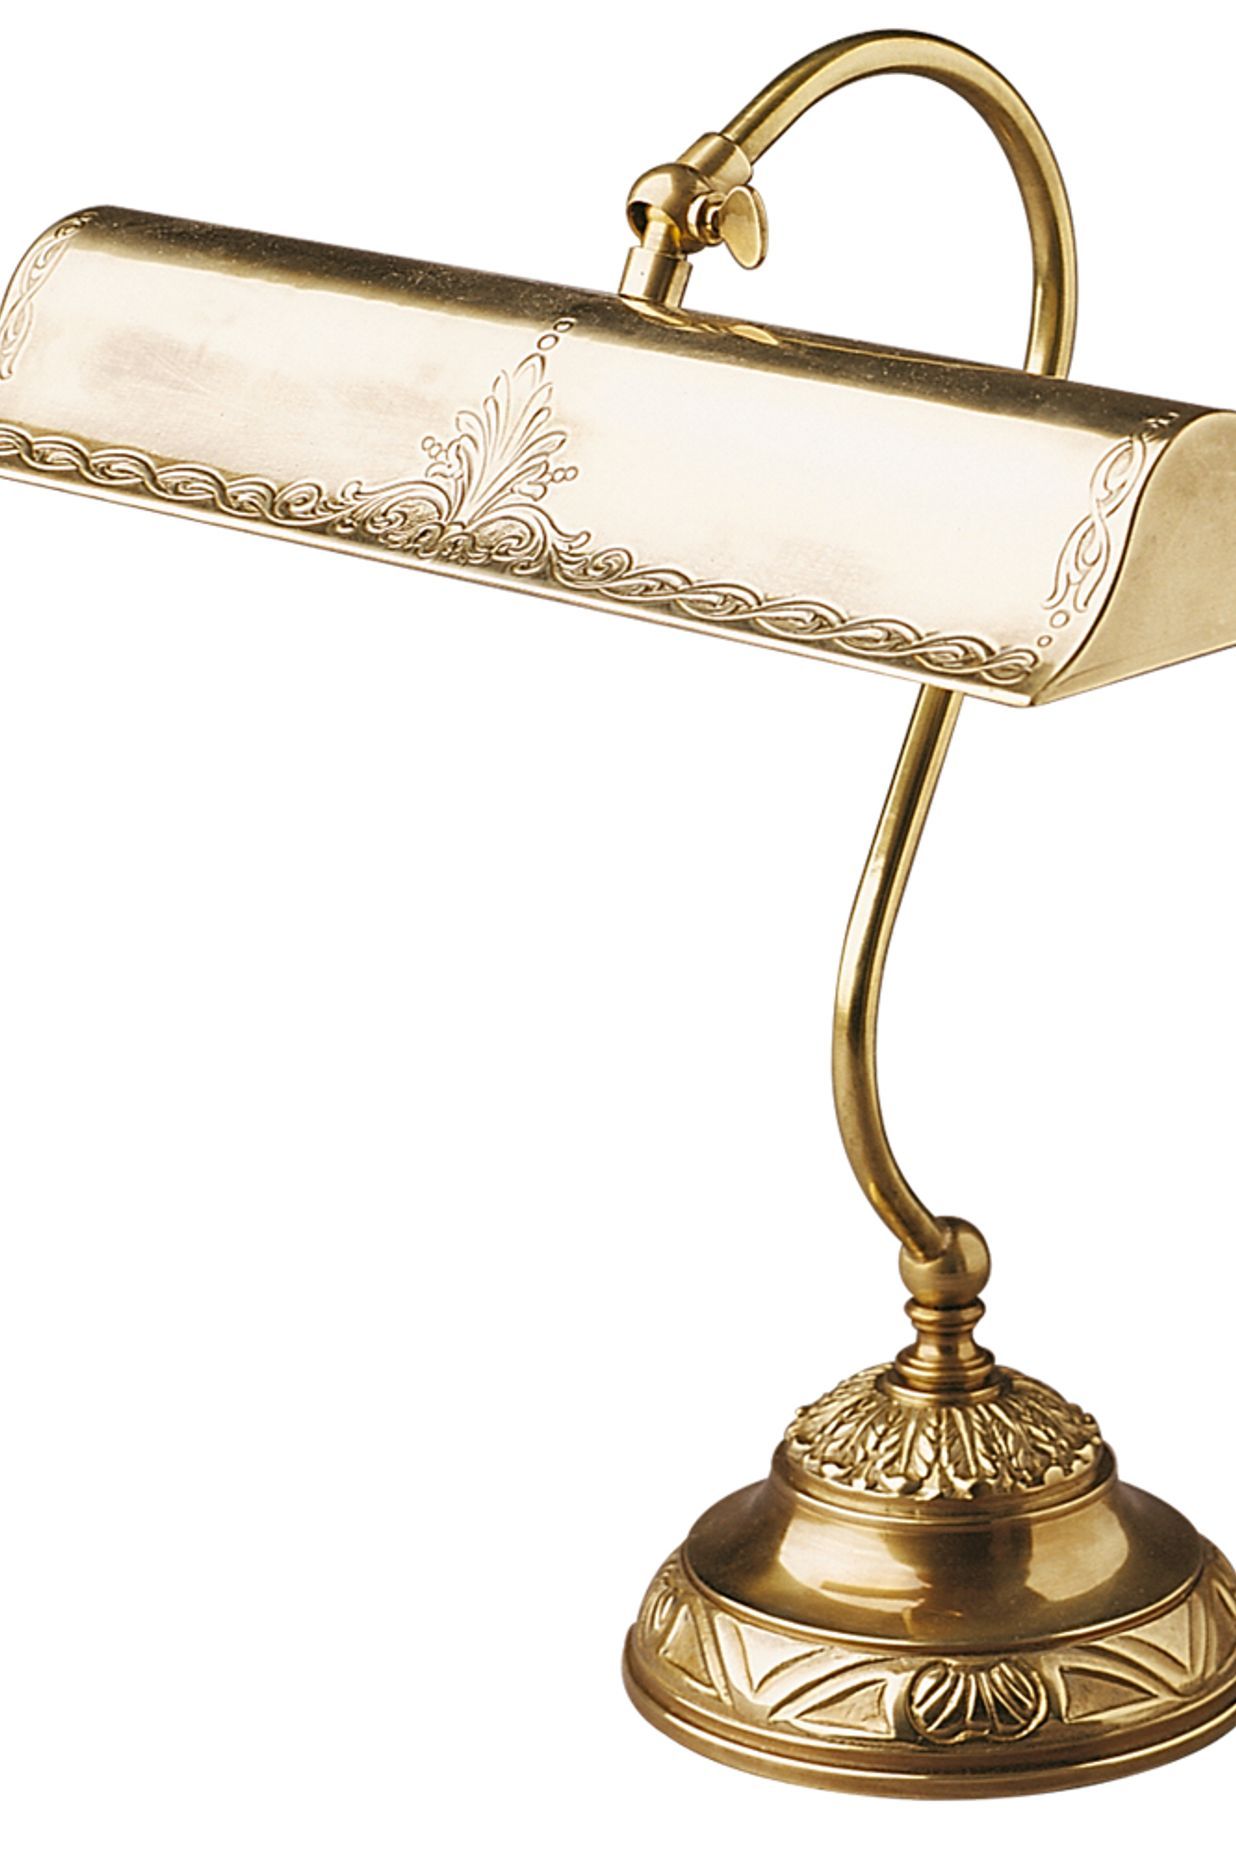 Hamlet desk lamp in polished brass by Pearl Lighting and Brassware